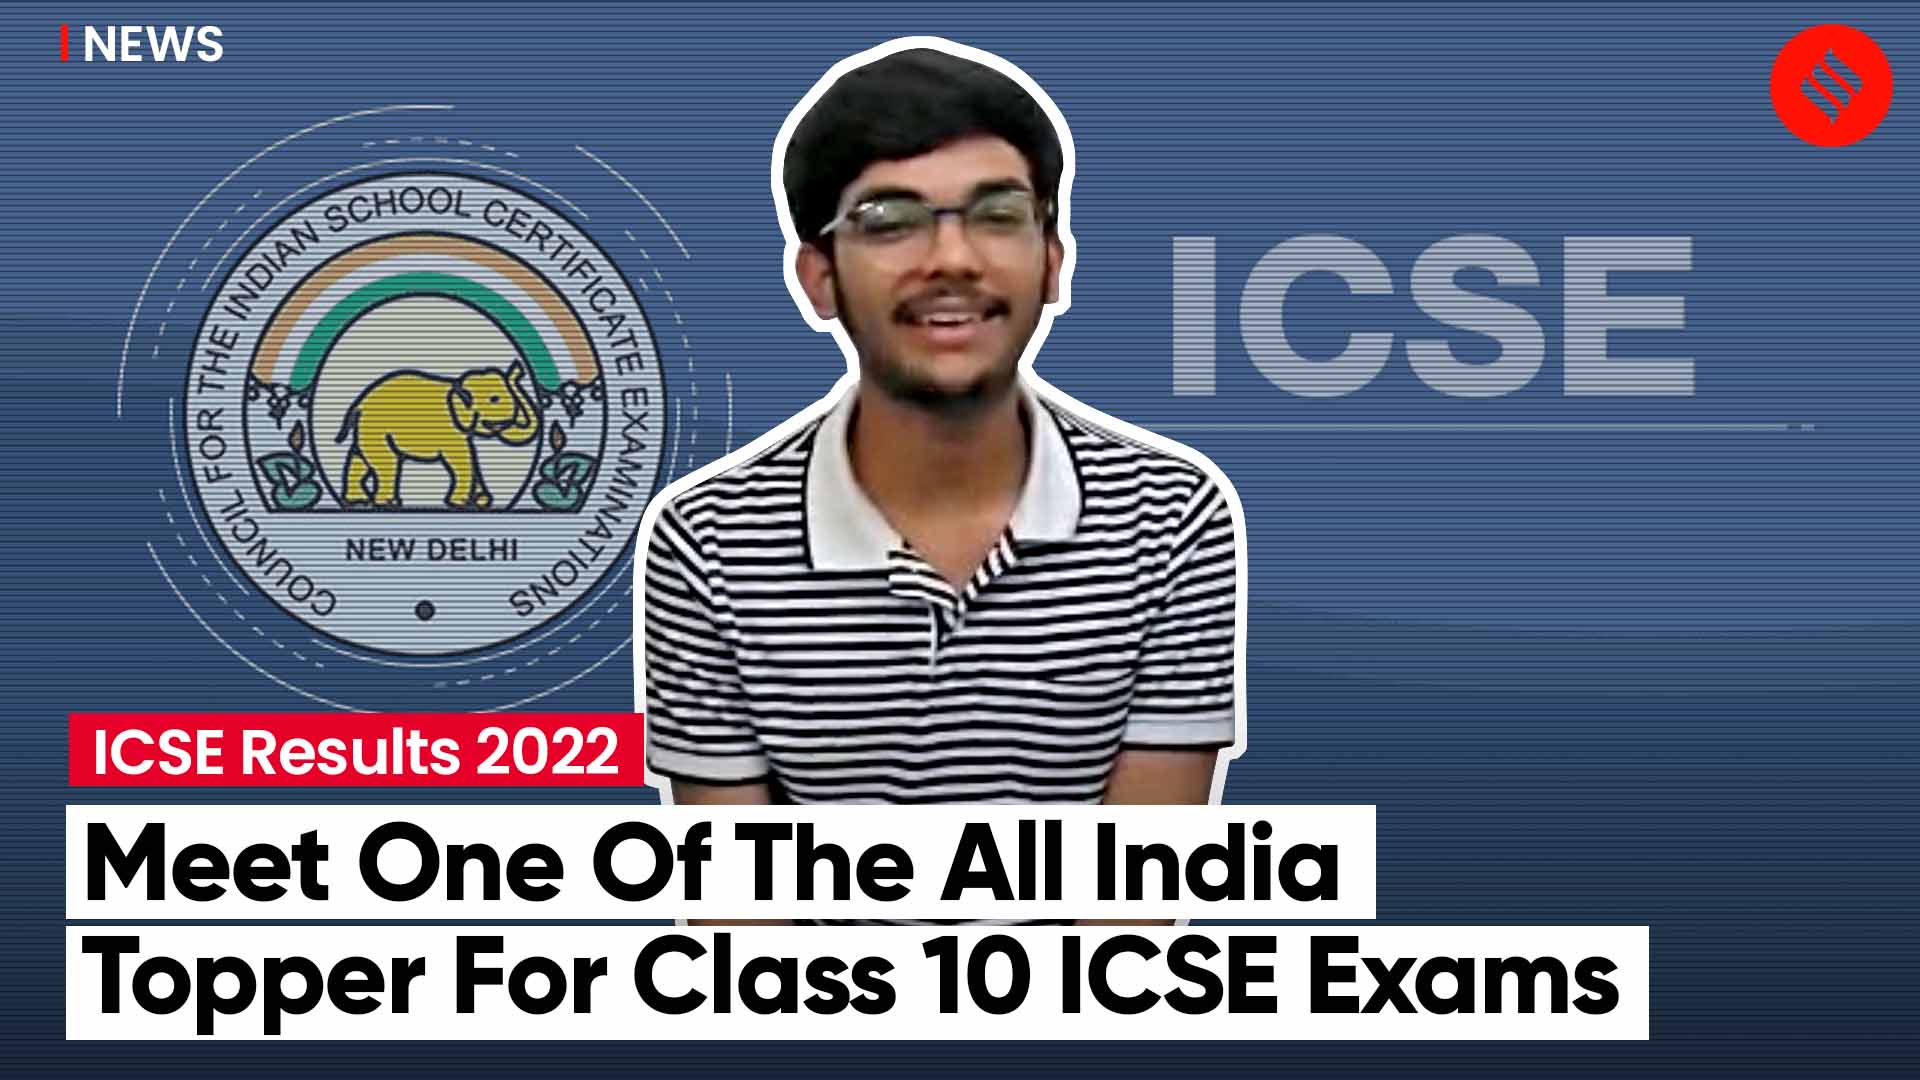 Icse toppers 2022 meet pushkar tripathi who secured a joint top spot